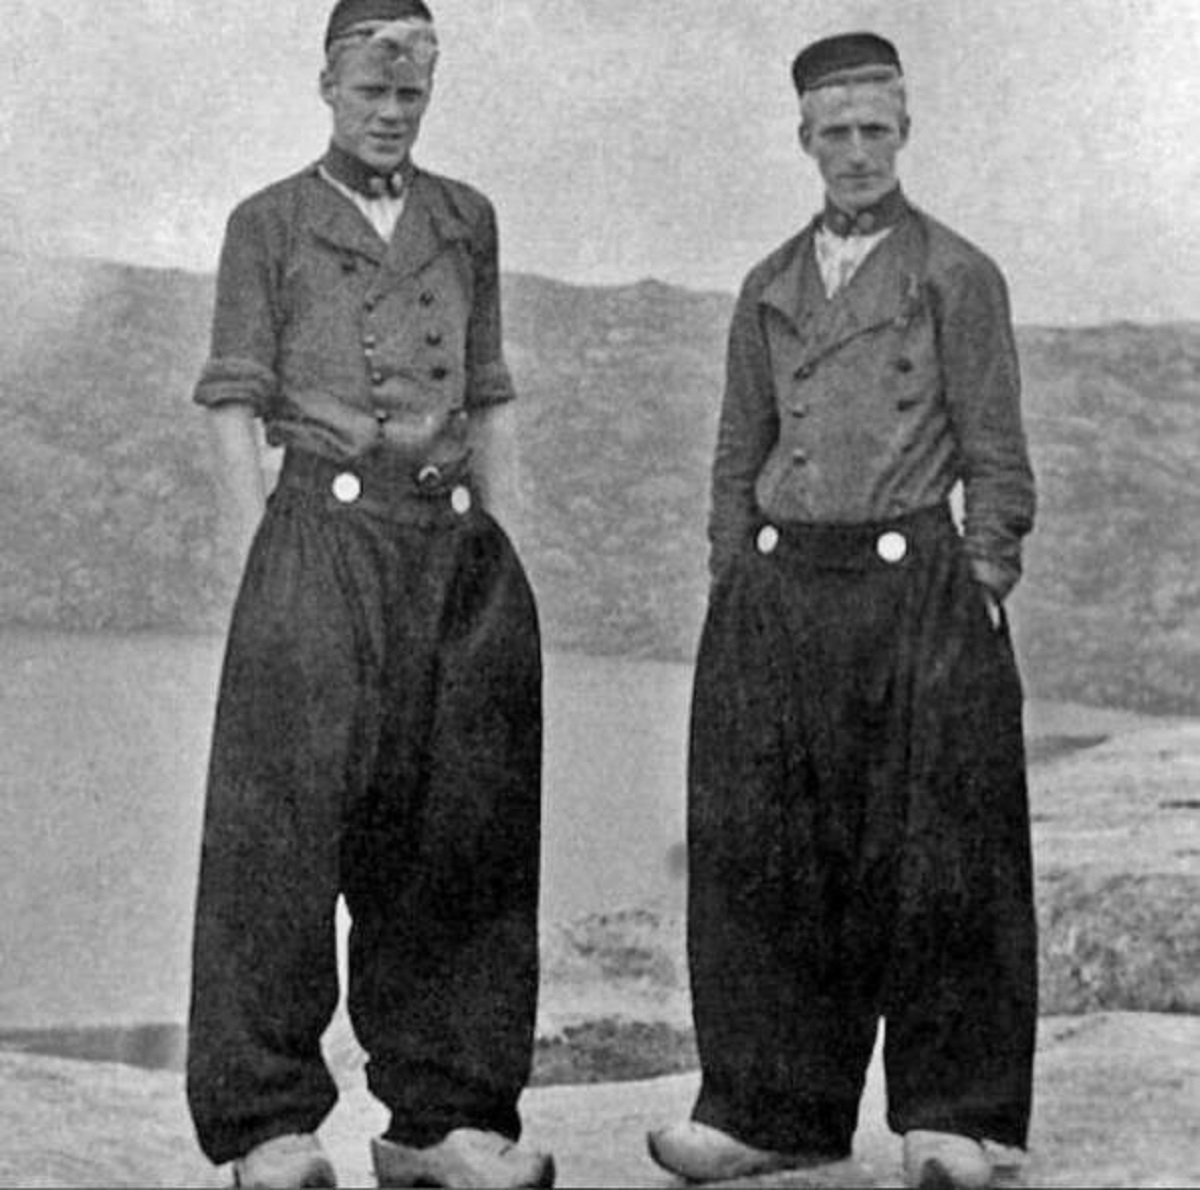 "In 1900, The Attire Worn By Dutch Men Was Greatly Influenced By The Prevailing Weather Conditions In The Netherlands"